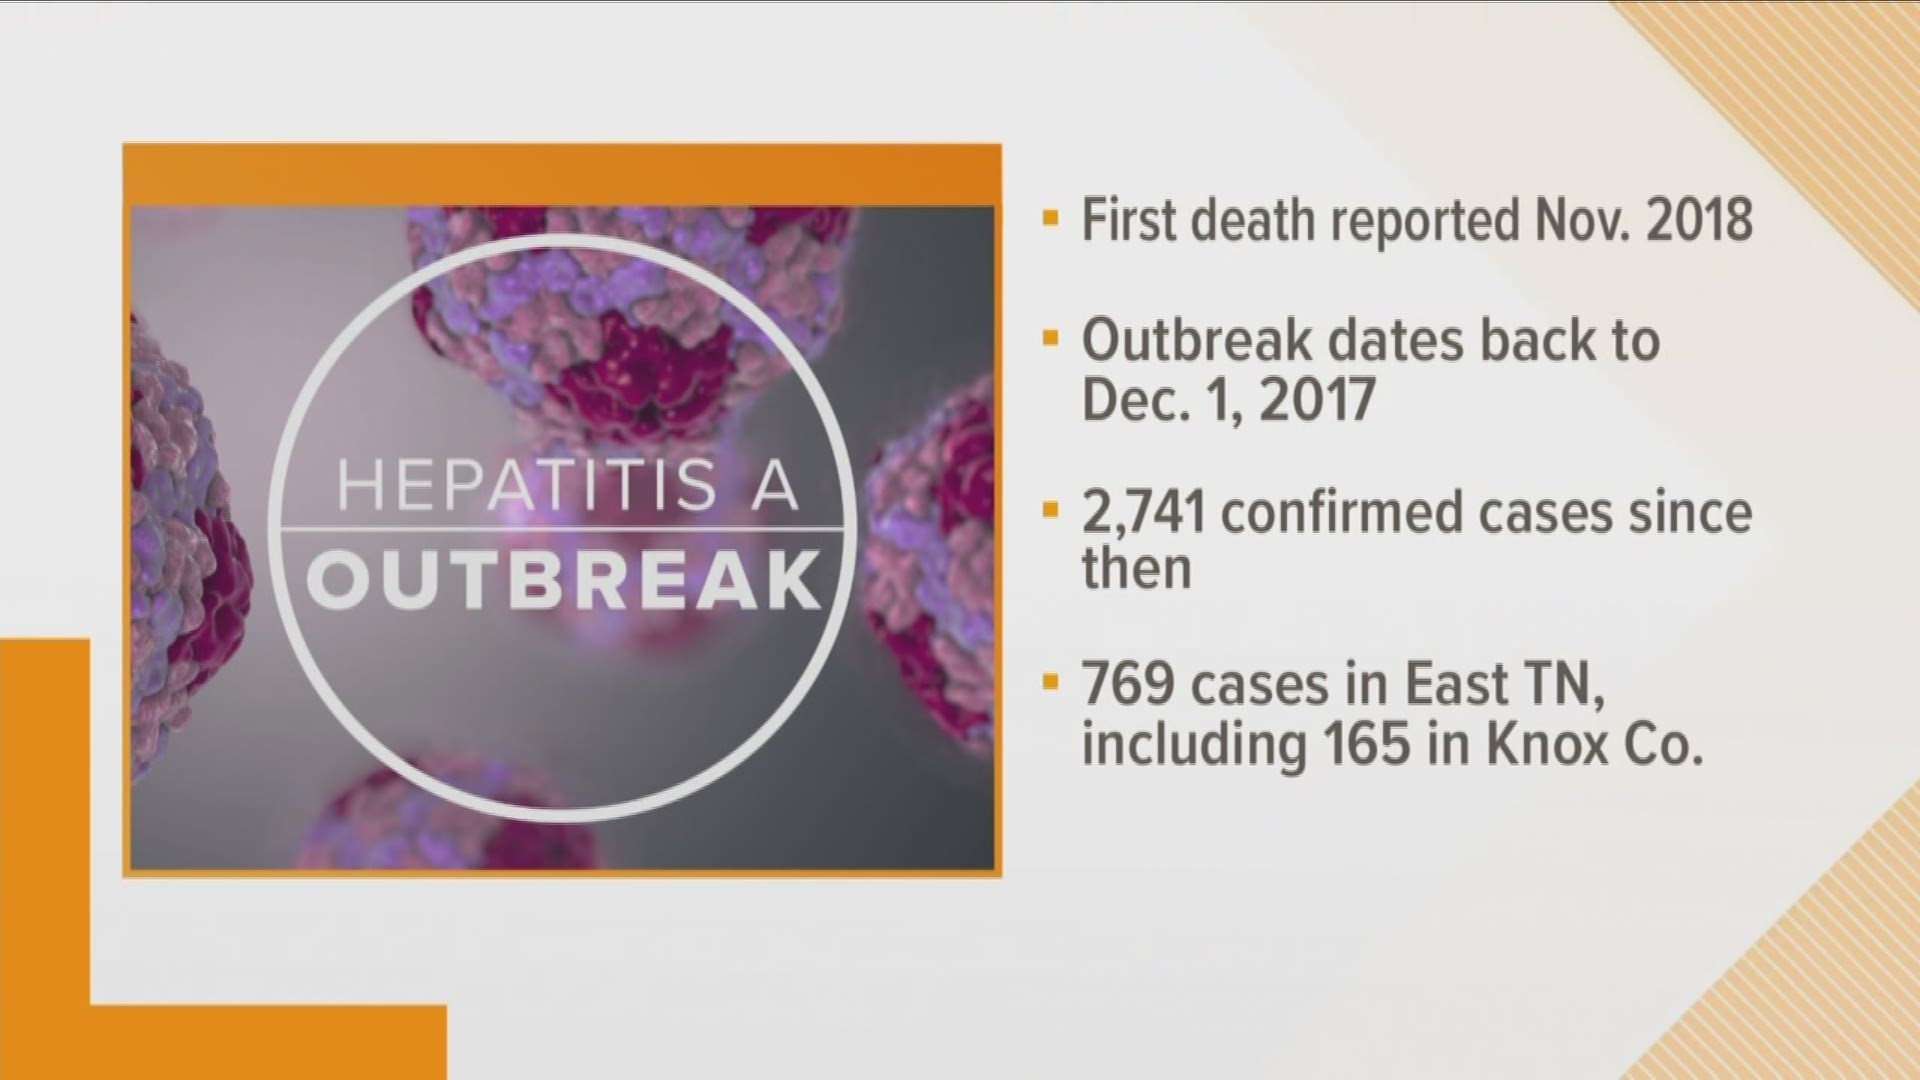 The outbreak dates back to December 2017 and there are 2,700 cases of Hepatitis A in Tennessee.